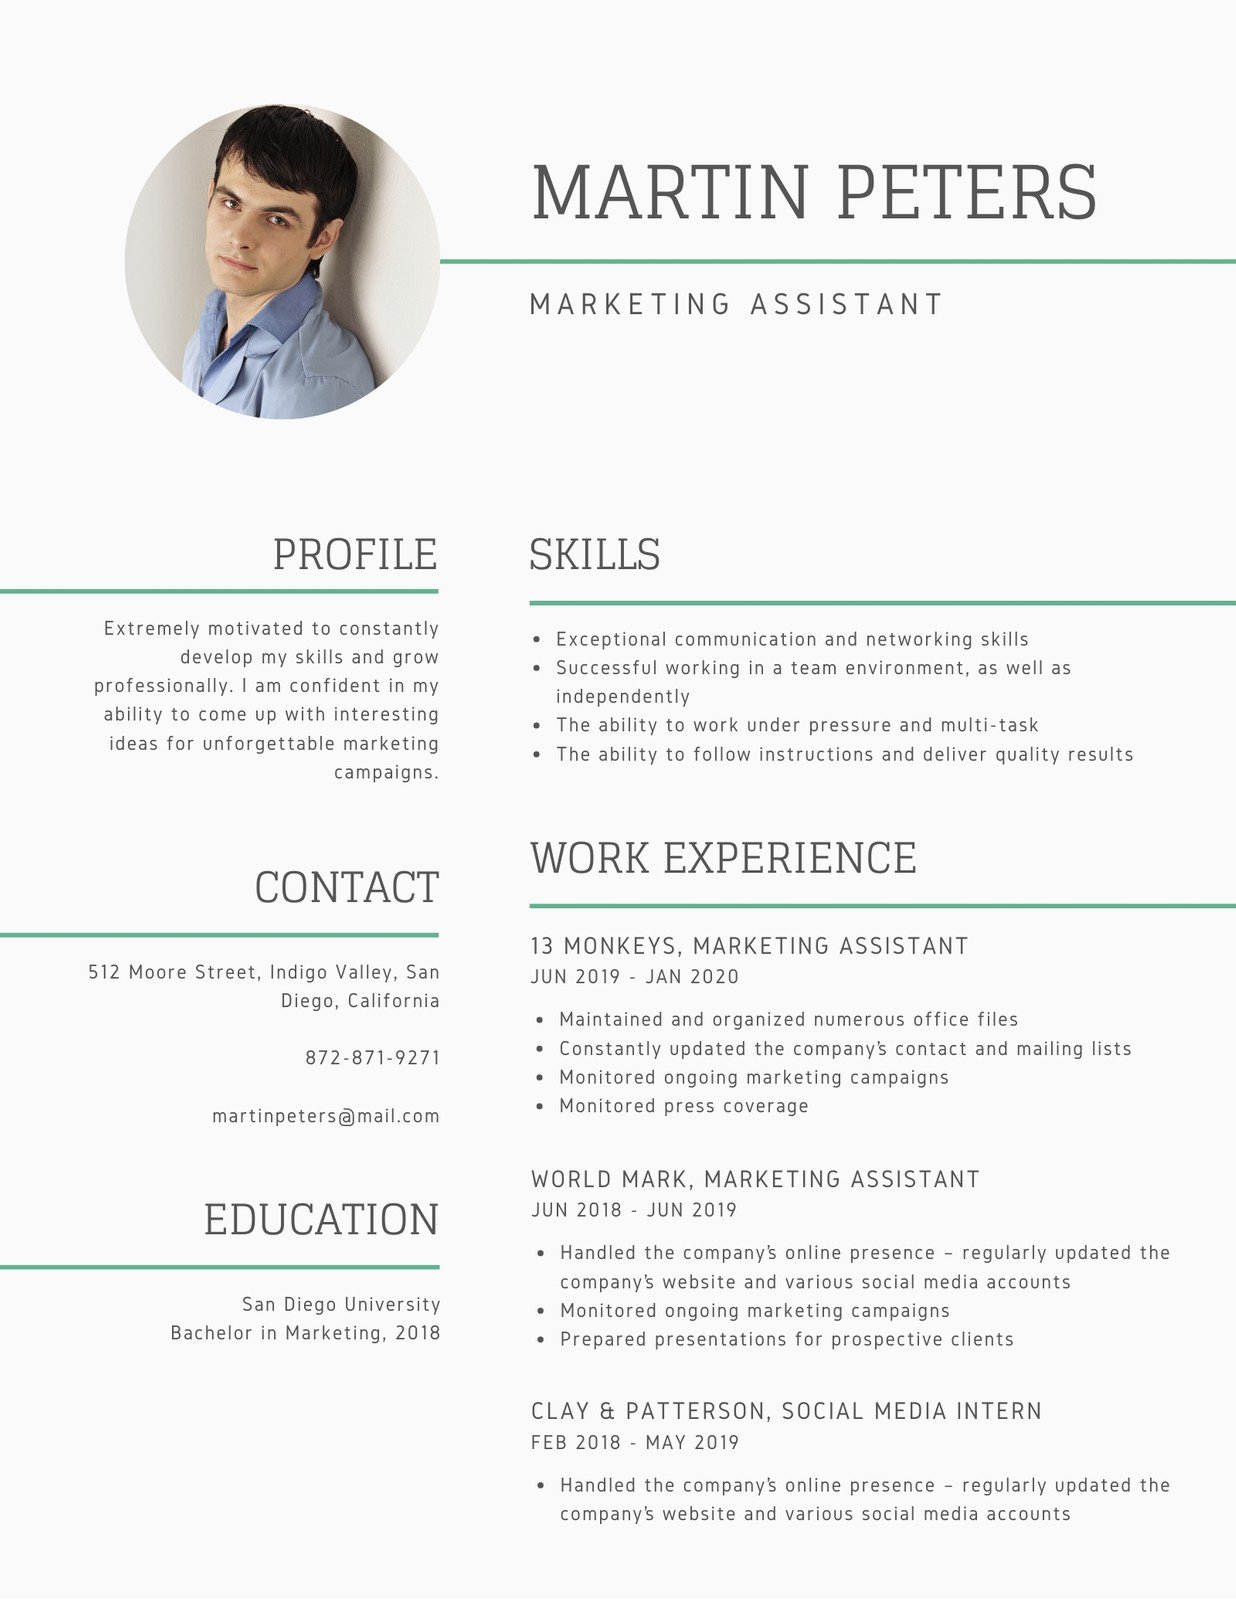 mint-green-lines-photo-marketing-assistant-modern-resume-templates-by